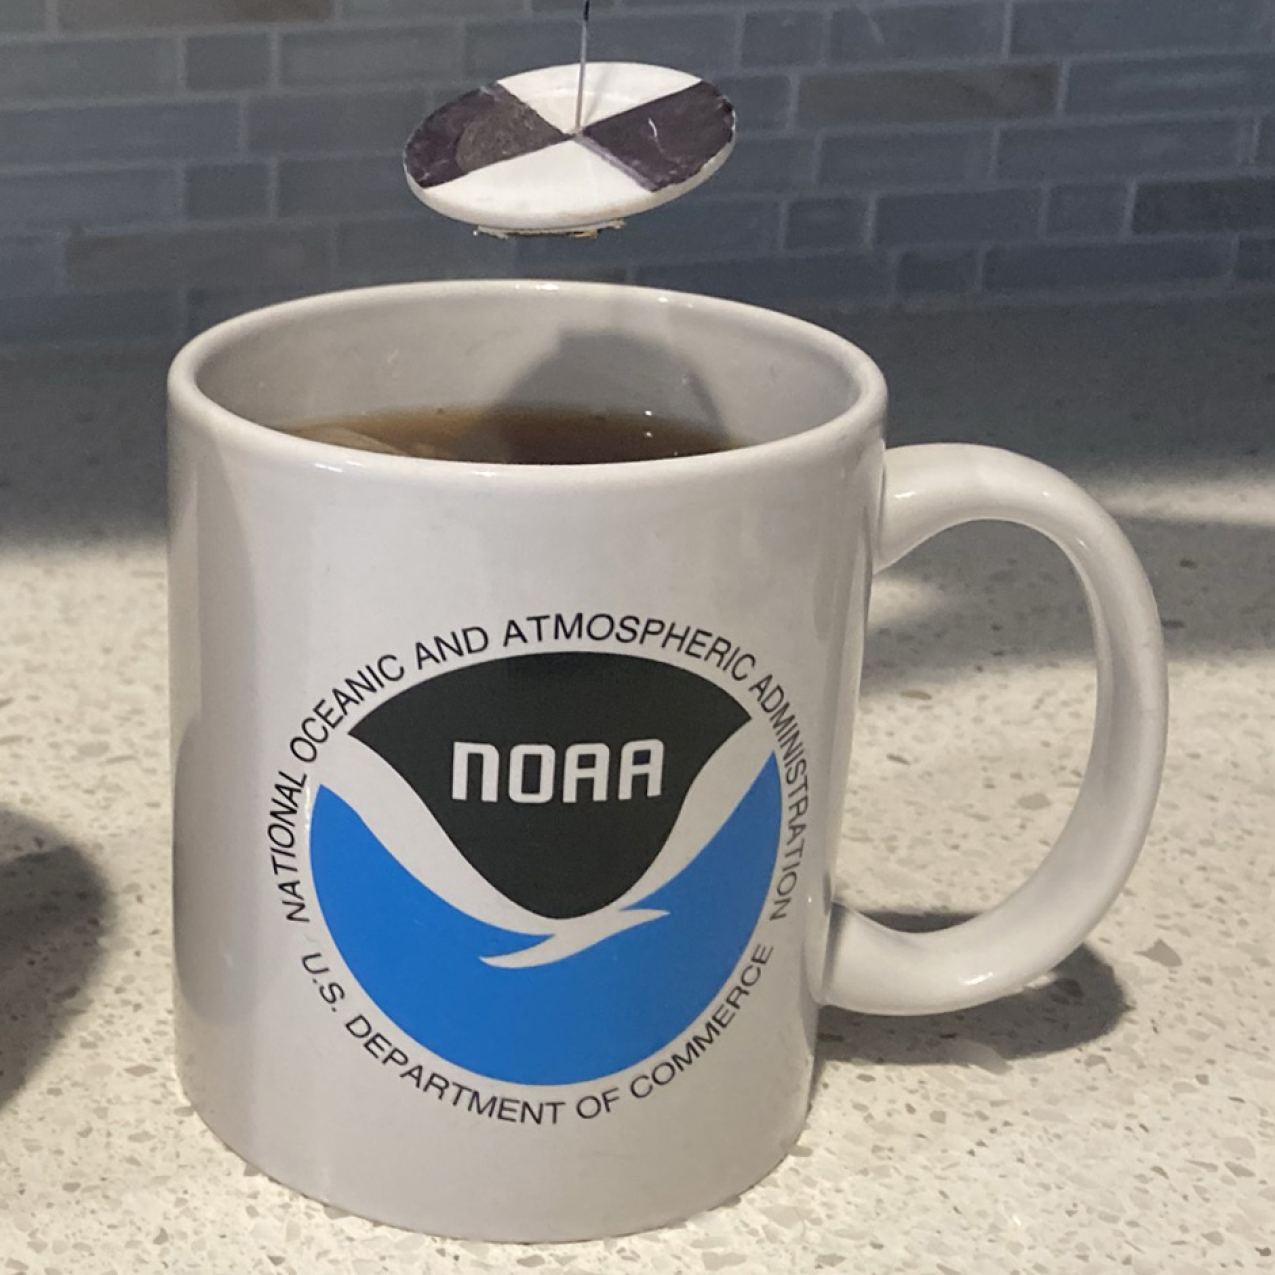 Learn about density by making a fancy layered hot cocoa or find out the "secc-tea" depth of your perfect up of tea with our oceanography in a mug activities. 
A mug with the NOAA logo on it and a miniature secchi disk is suspended above it. (The secchi disk is made of a white disk with black on opposite quarters. It is hanging from a string that has markings every centimeter.)